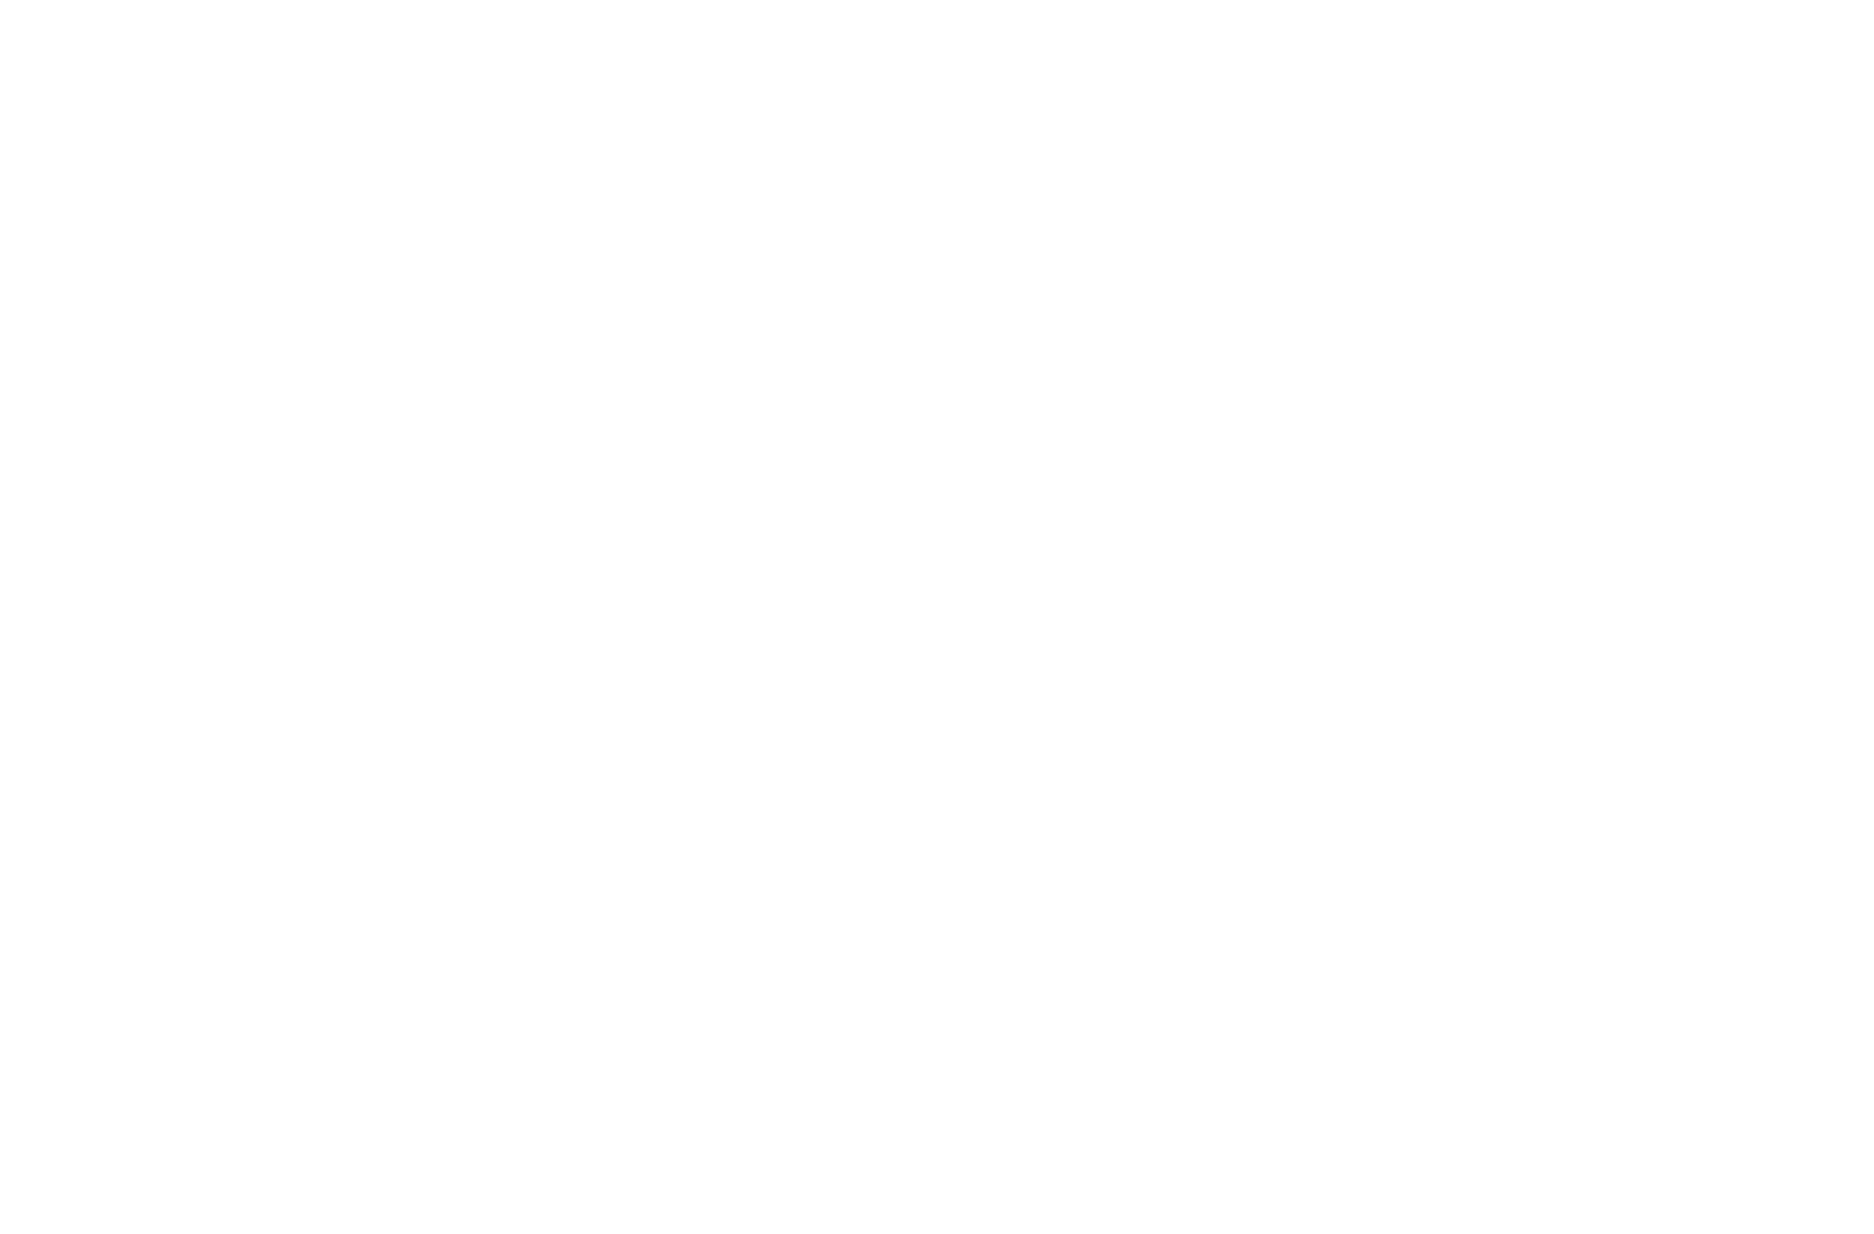 Bossa Games announces open-world co-op survival game Lost Skies – Digitally  Downloaded